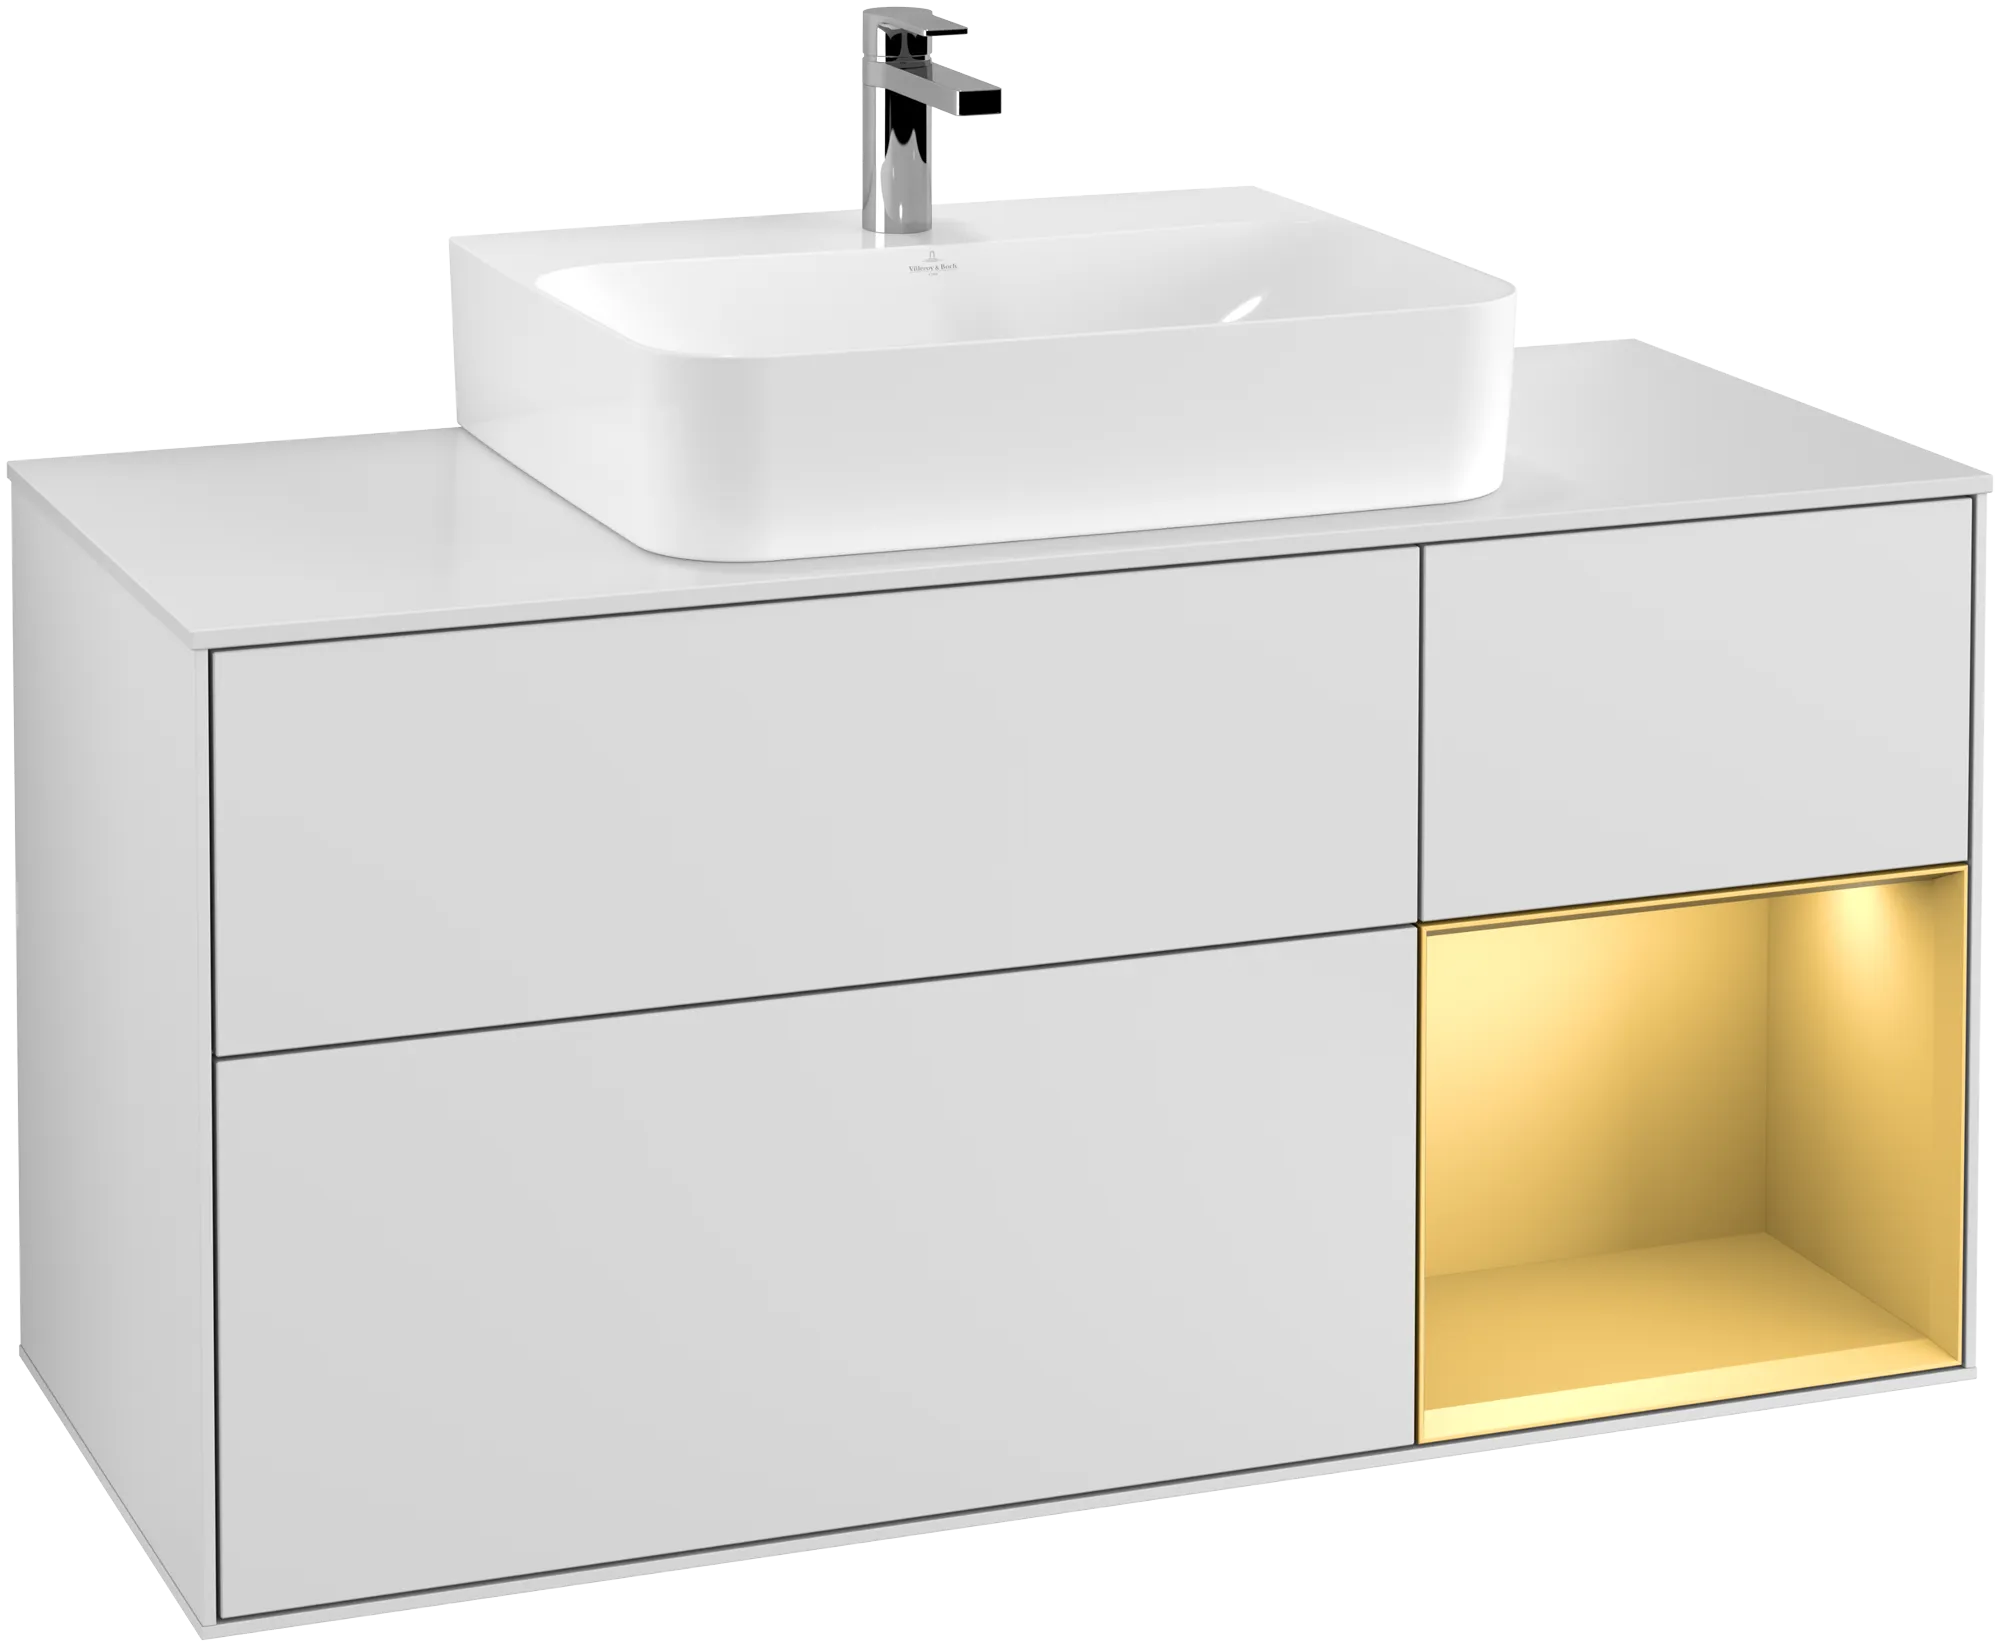 Obrázek VILLEROY BOCH Finion Vanity unit, with lighting, 3 pull-out compartments, 1200 x 603 x 501 mm, White Matt Lacquer / Gold Matt Lacquer / Glass White Matt #G171HFMT